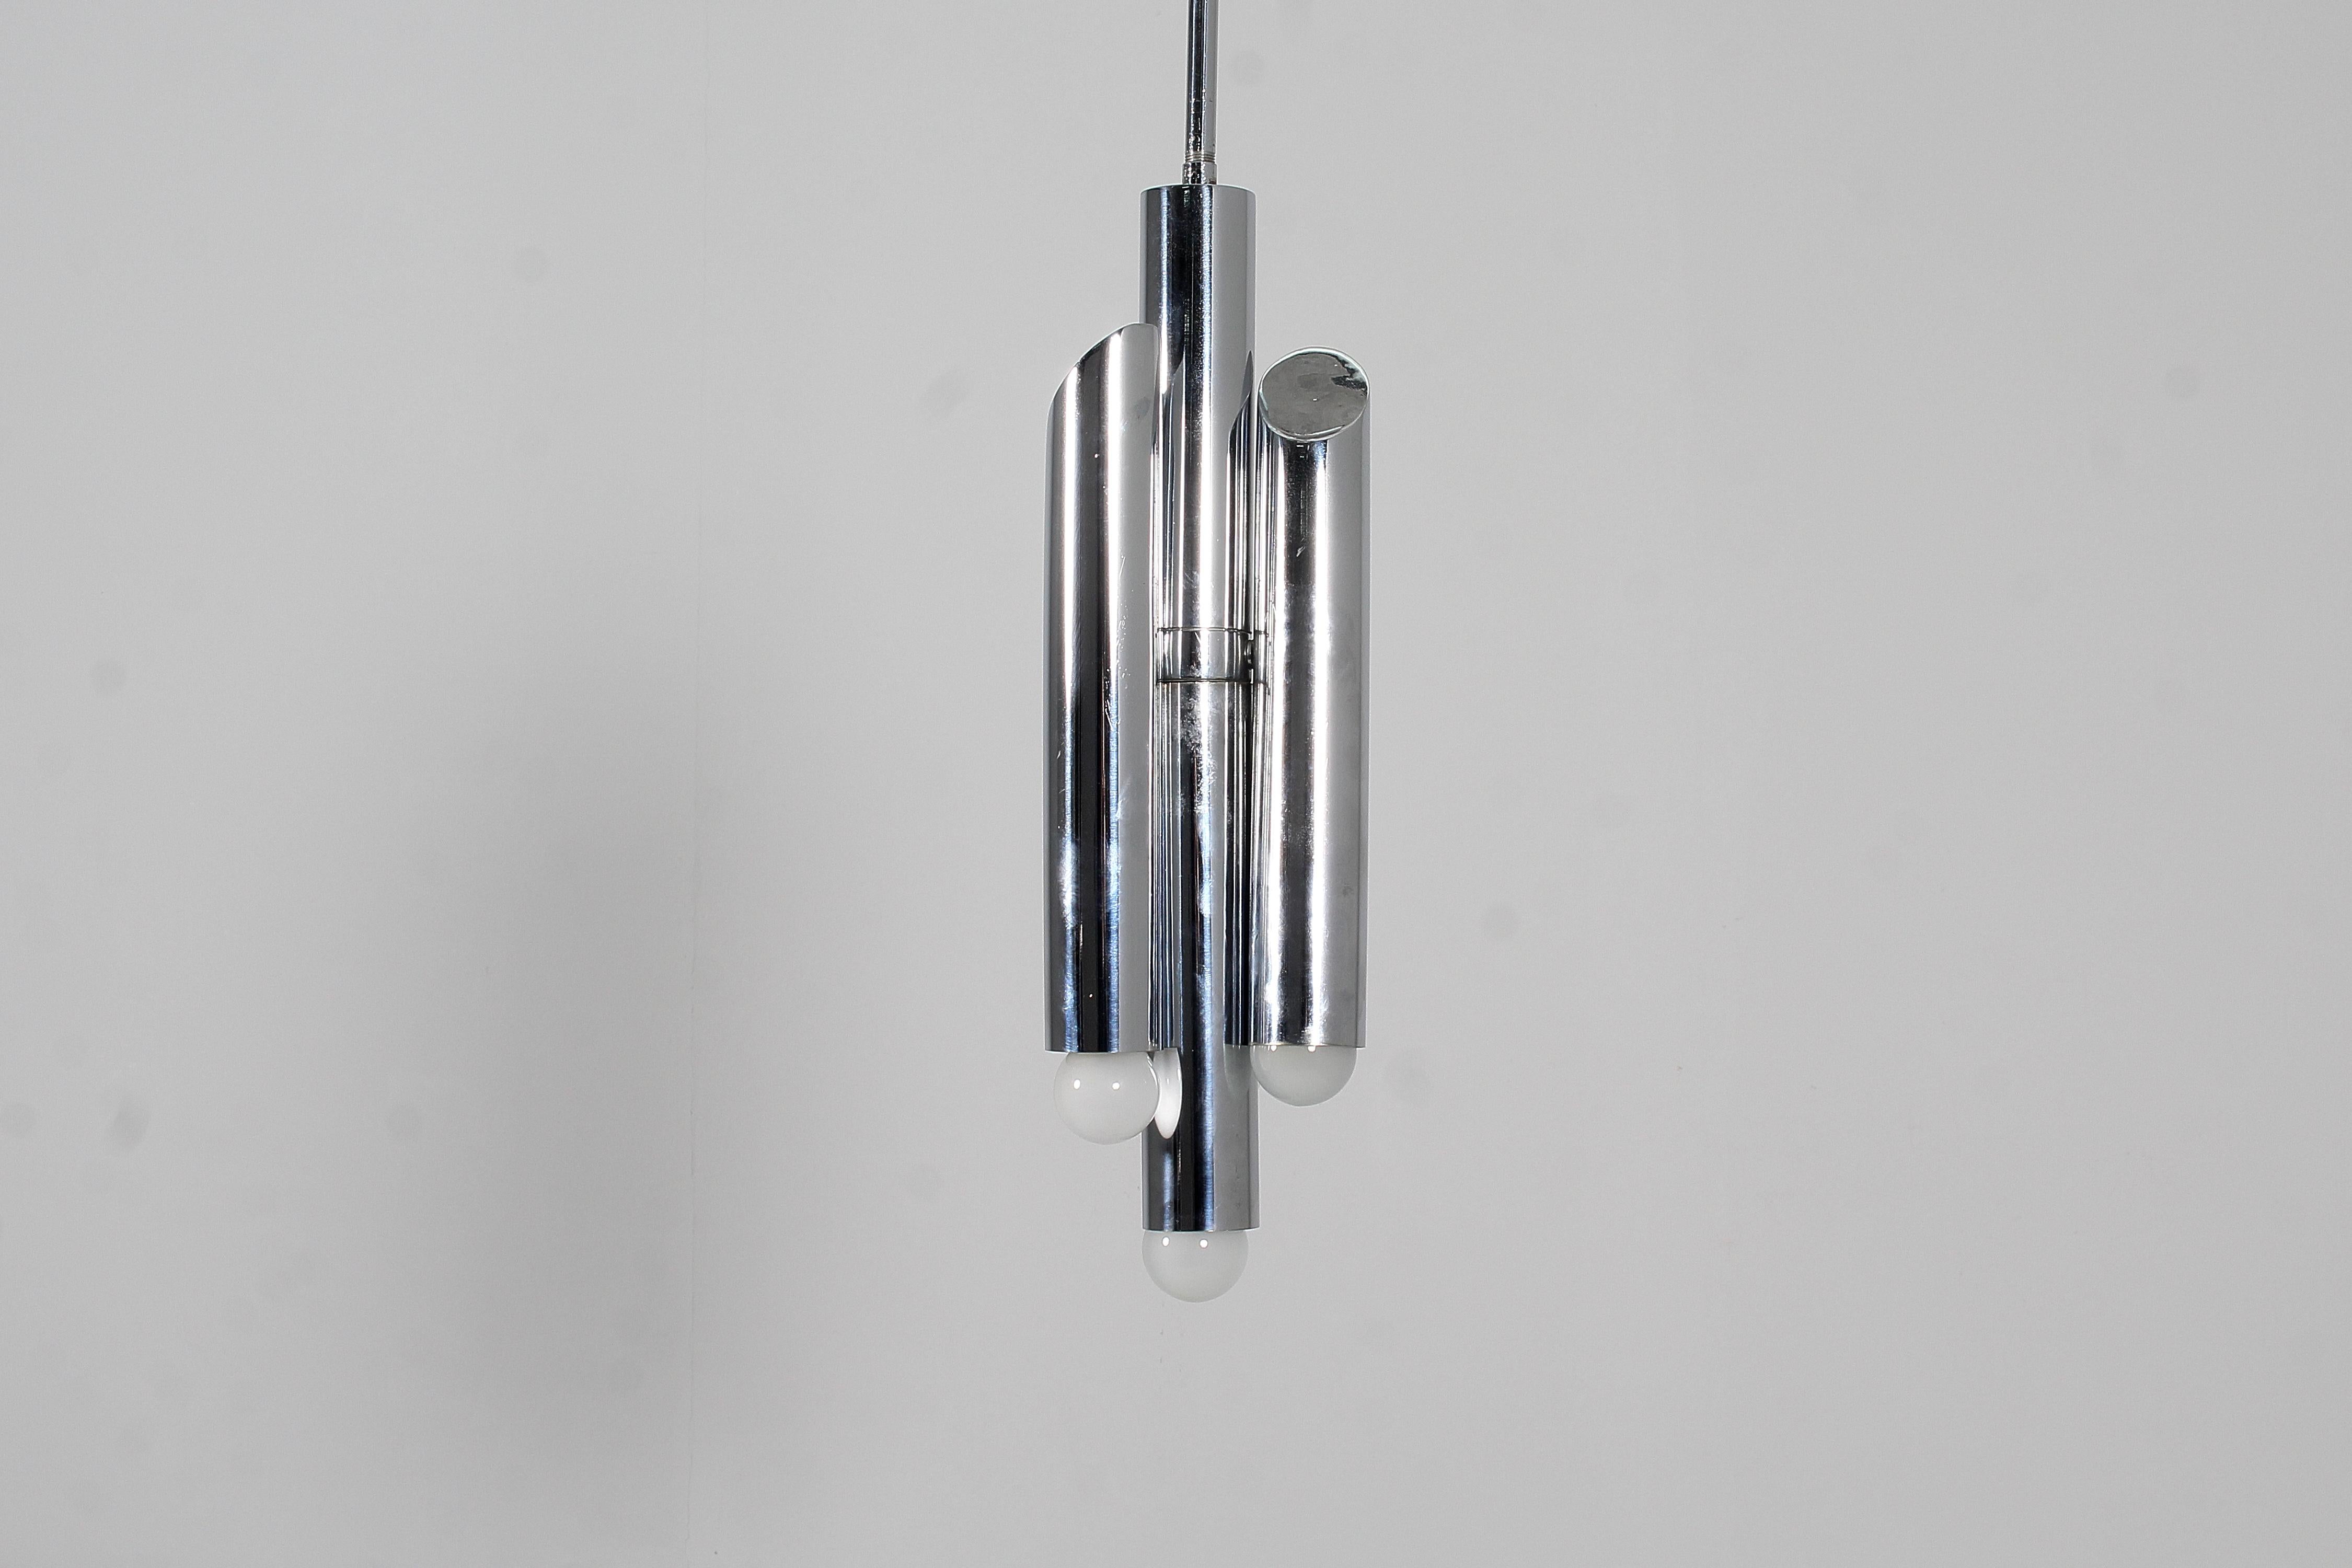 Space Age Reggiani Chromed Steel Adjustable Suspension Lamp 70s Italy For Sale 6